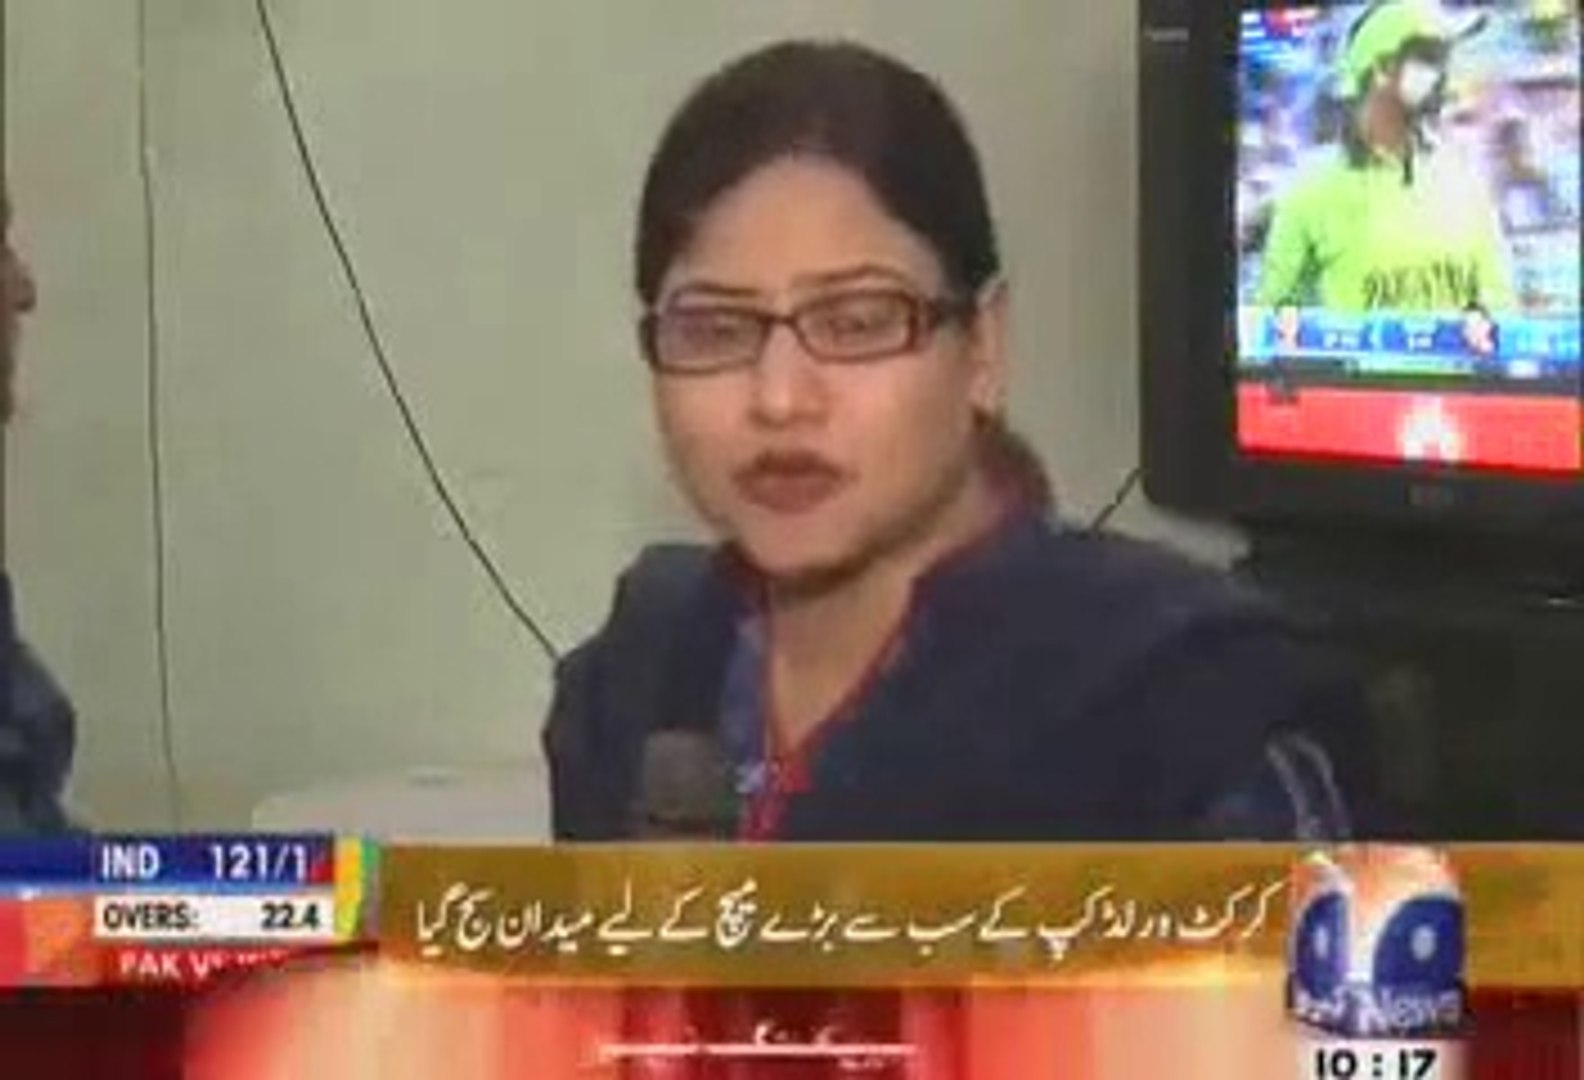 Pak Vs India - Sohaib Maqsood Family Excited For World Cup 2015